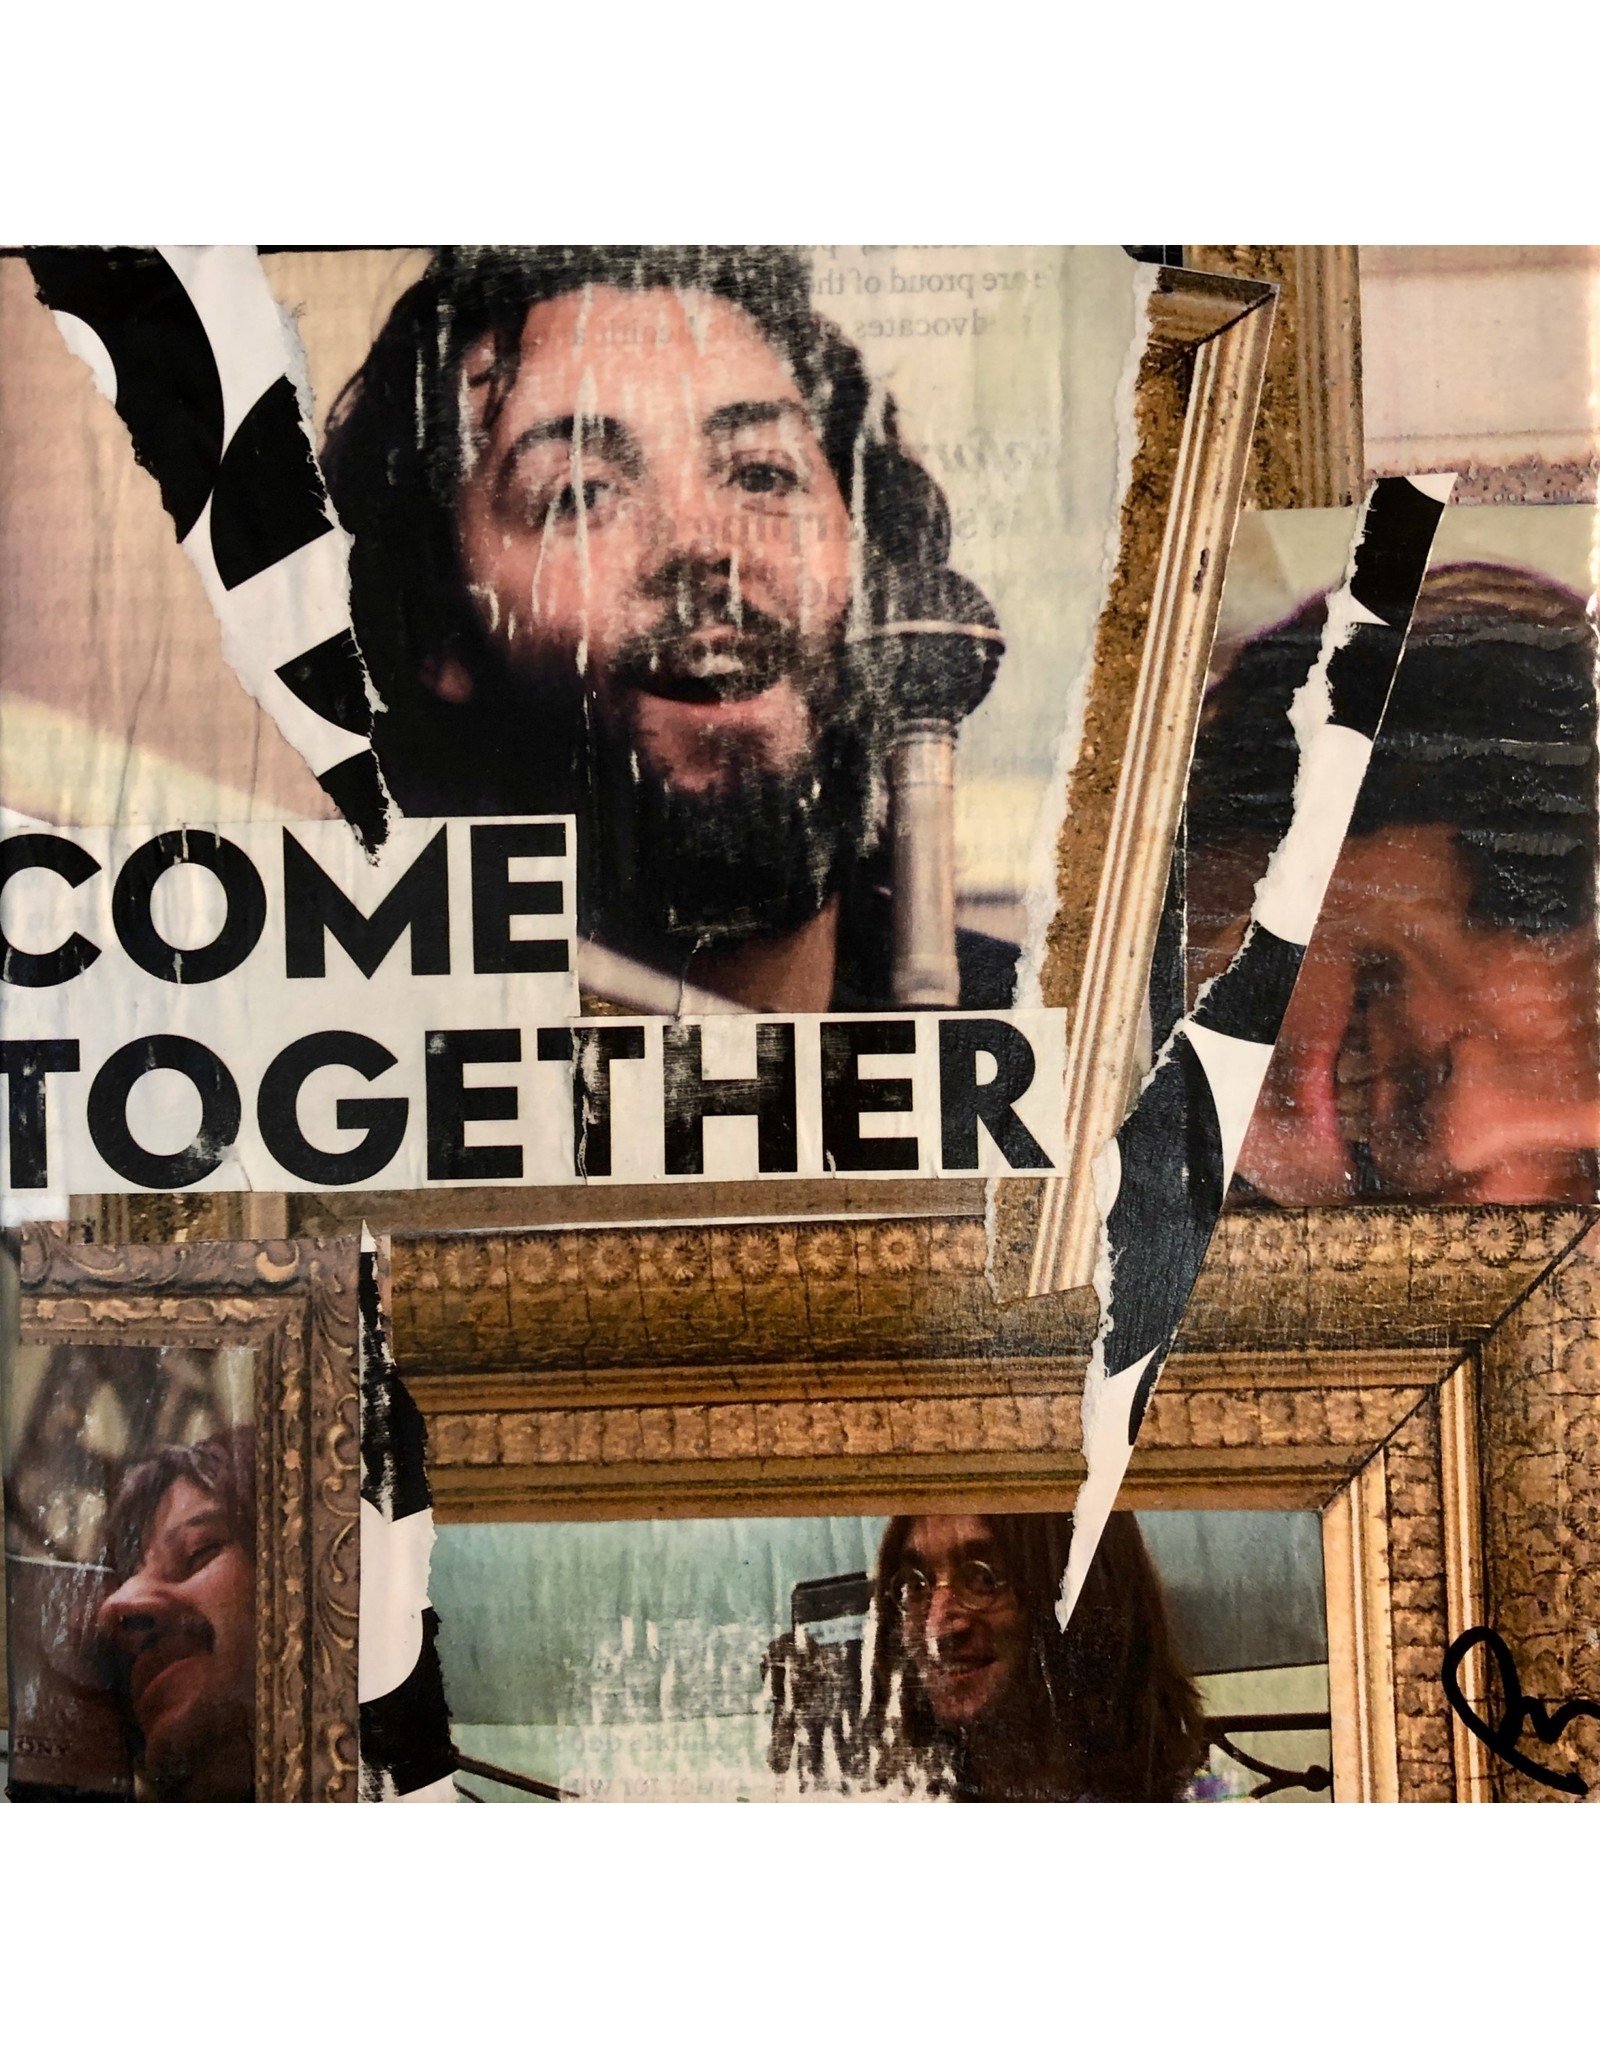 Pam Maschal "Come Together"  collage on canvas, 6" sq, PAMM